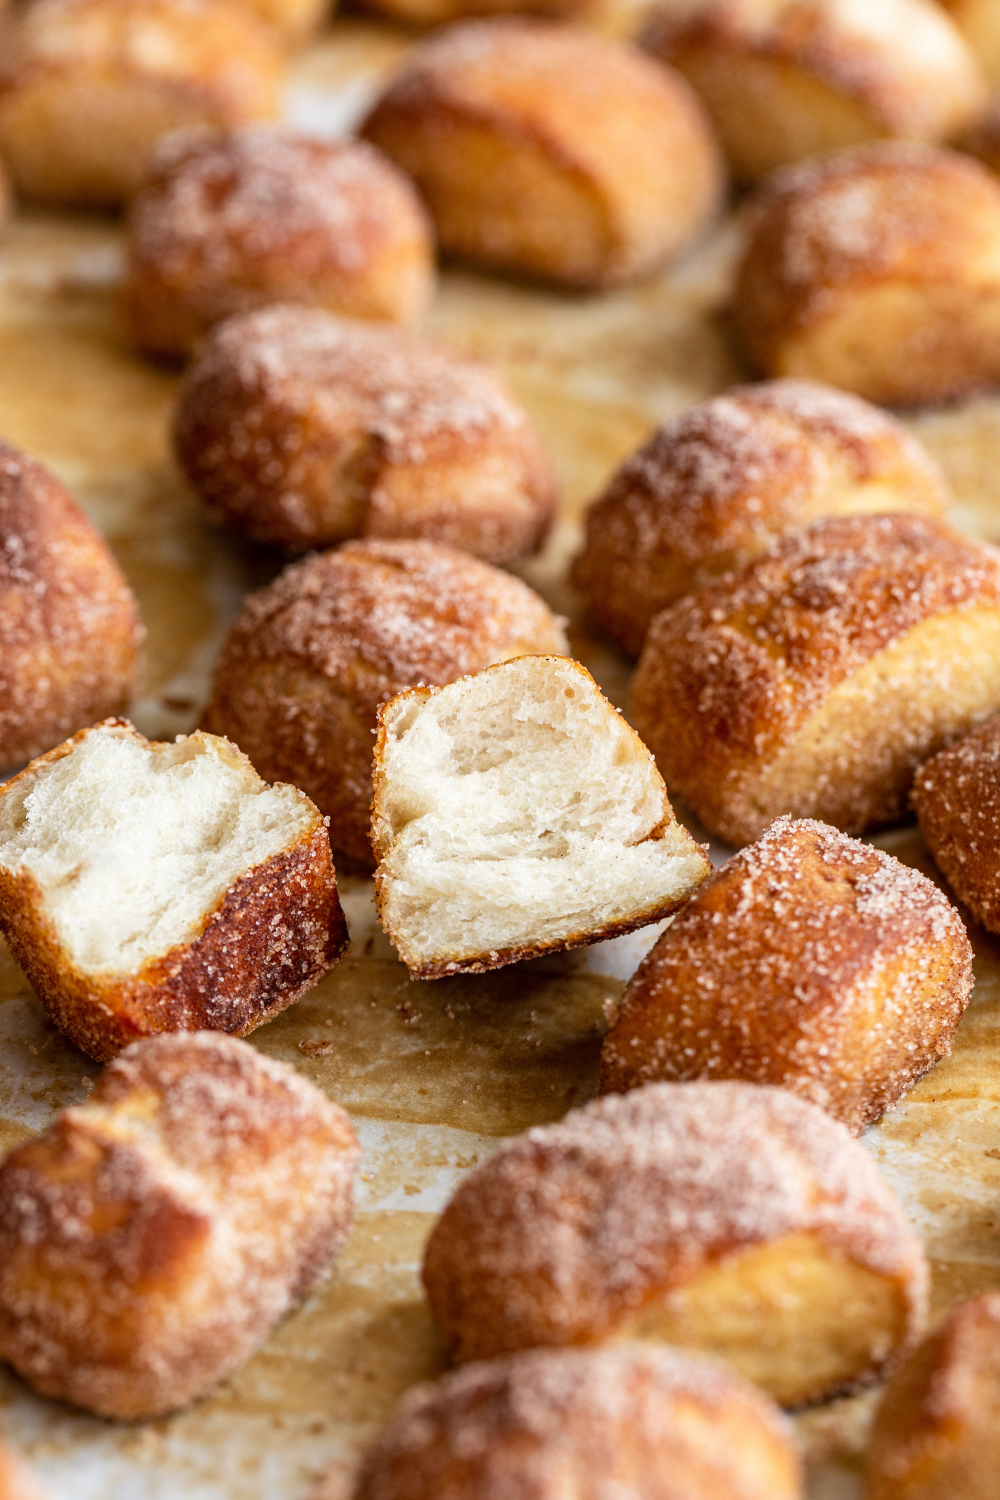 pretzel bites coated in cinnamon sugar on a baking tray, with one broken open so you can see the texture